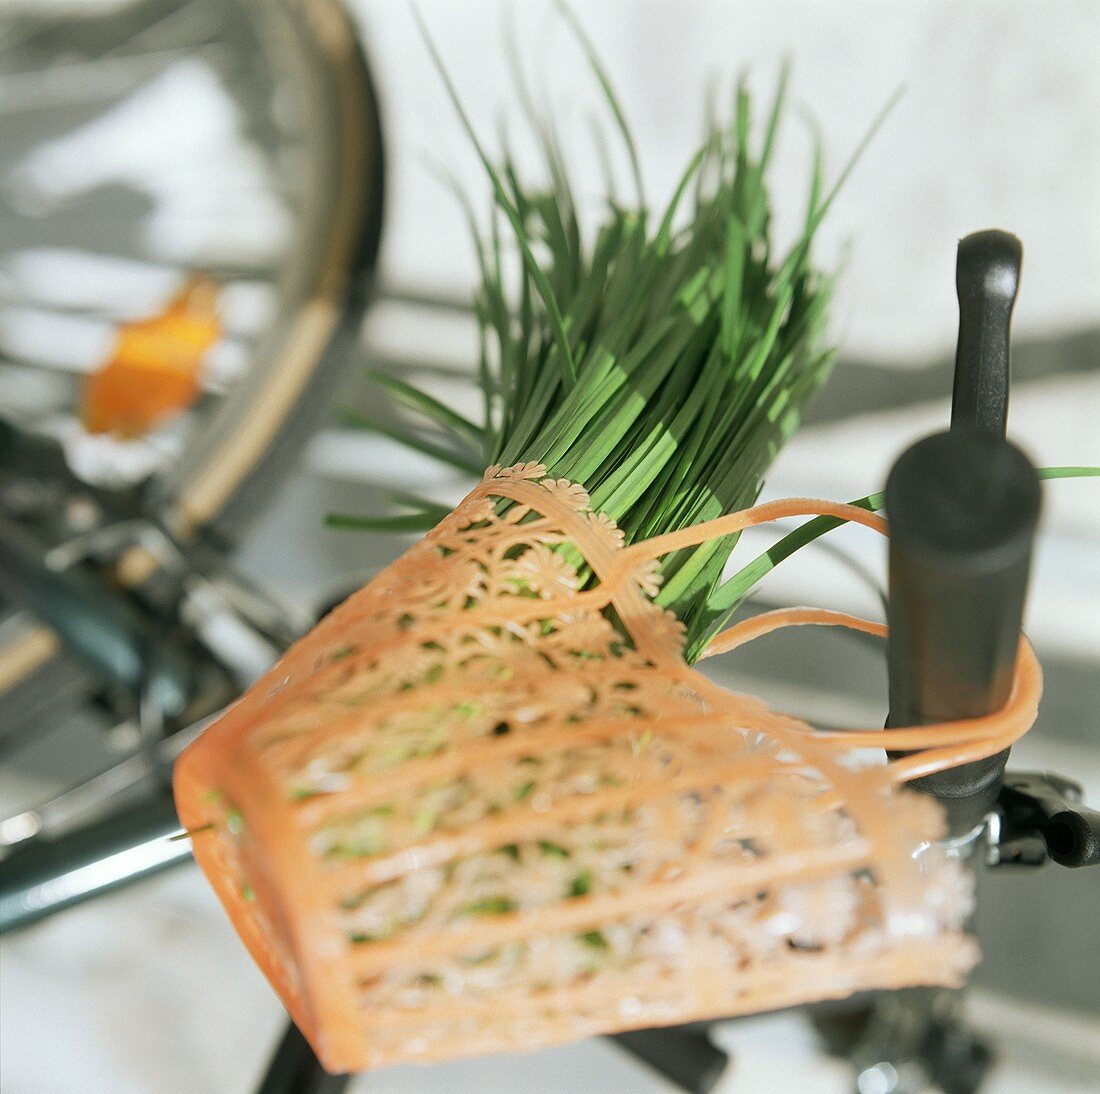 Garlic chives in shopping bag on a bicycle